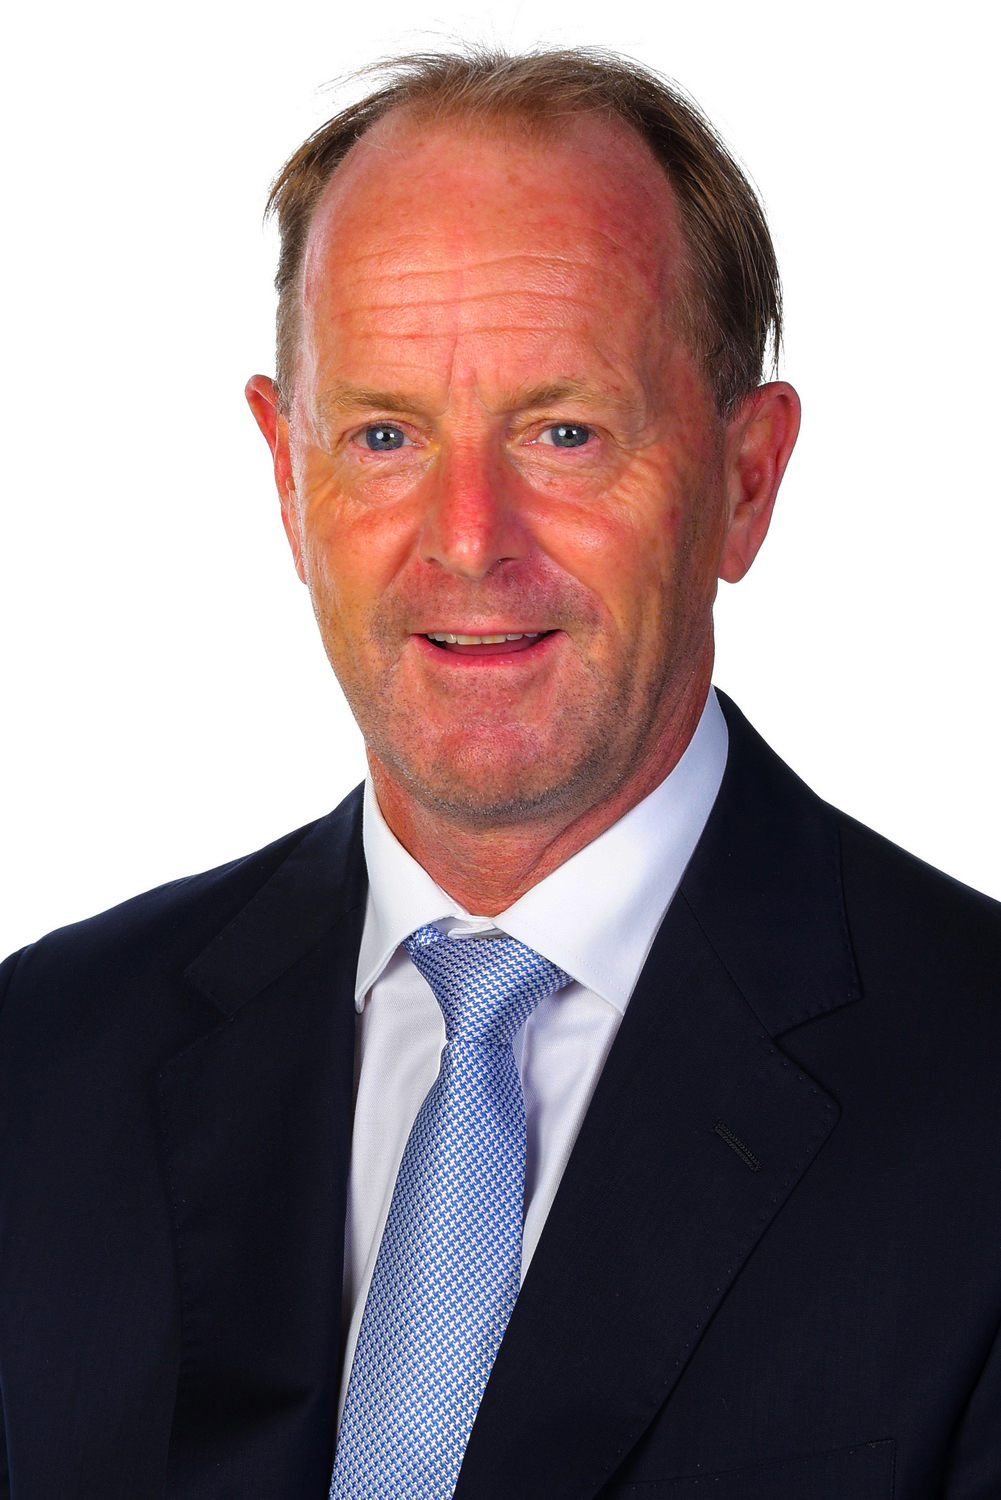 Photograph of the Headmaster of the English College in Dubai Mark Ford taken in October 2021